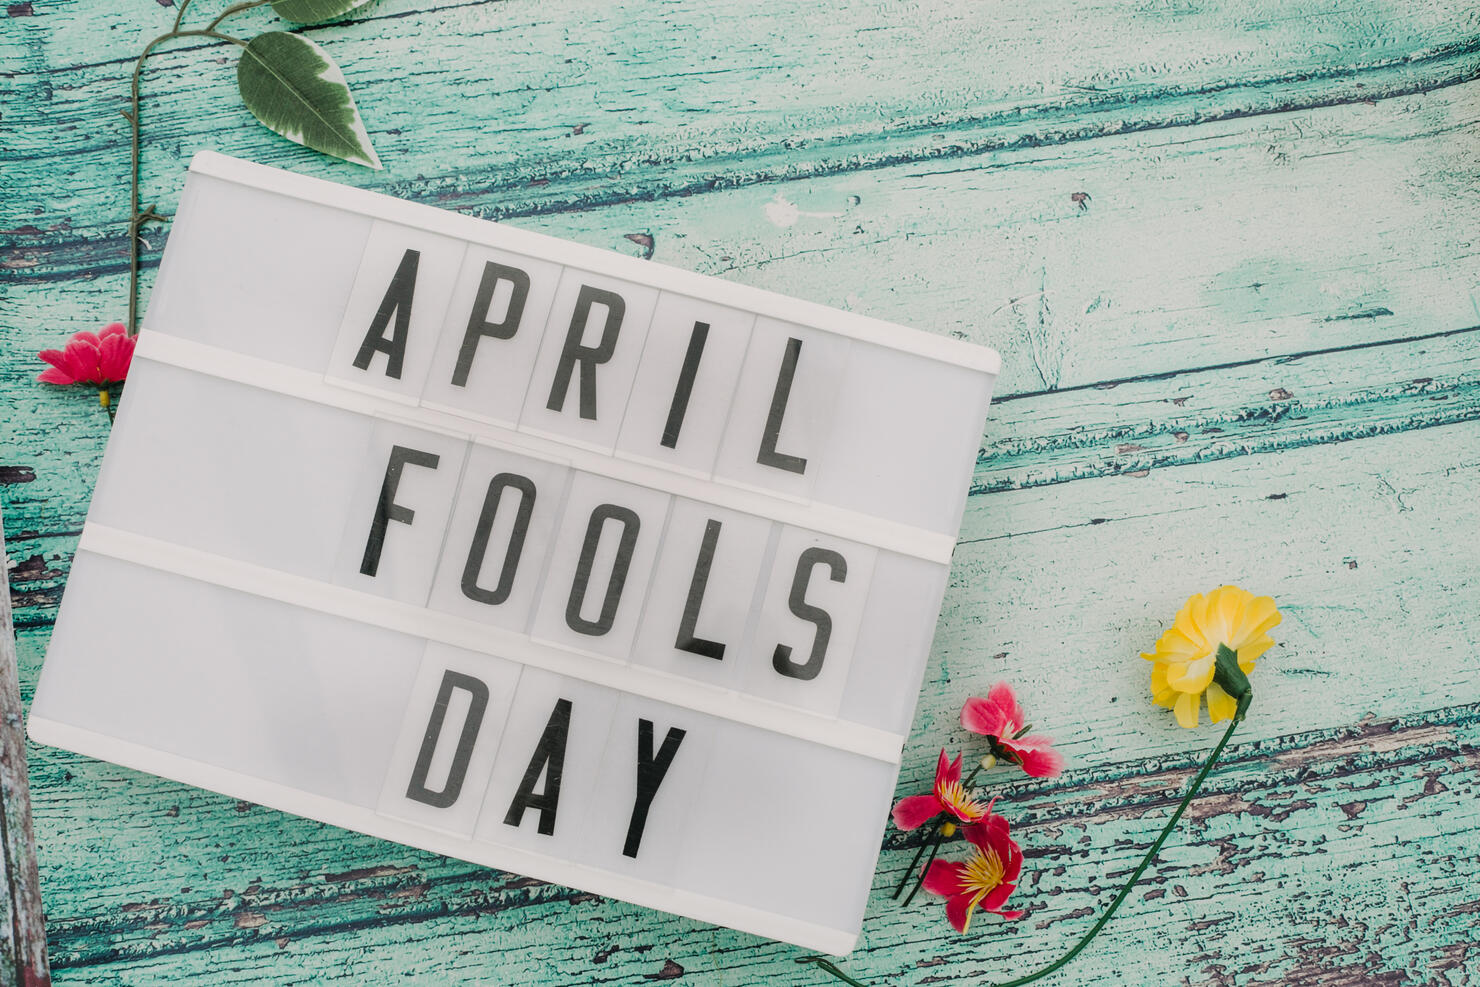 'April fools day in lightbox